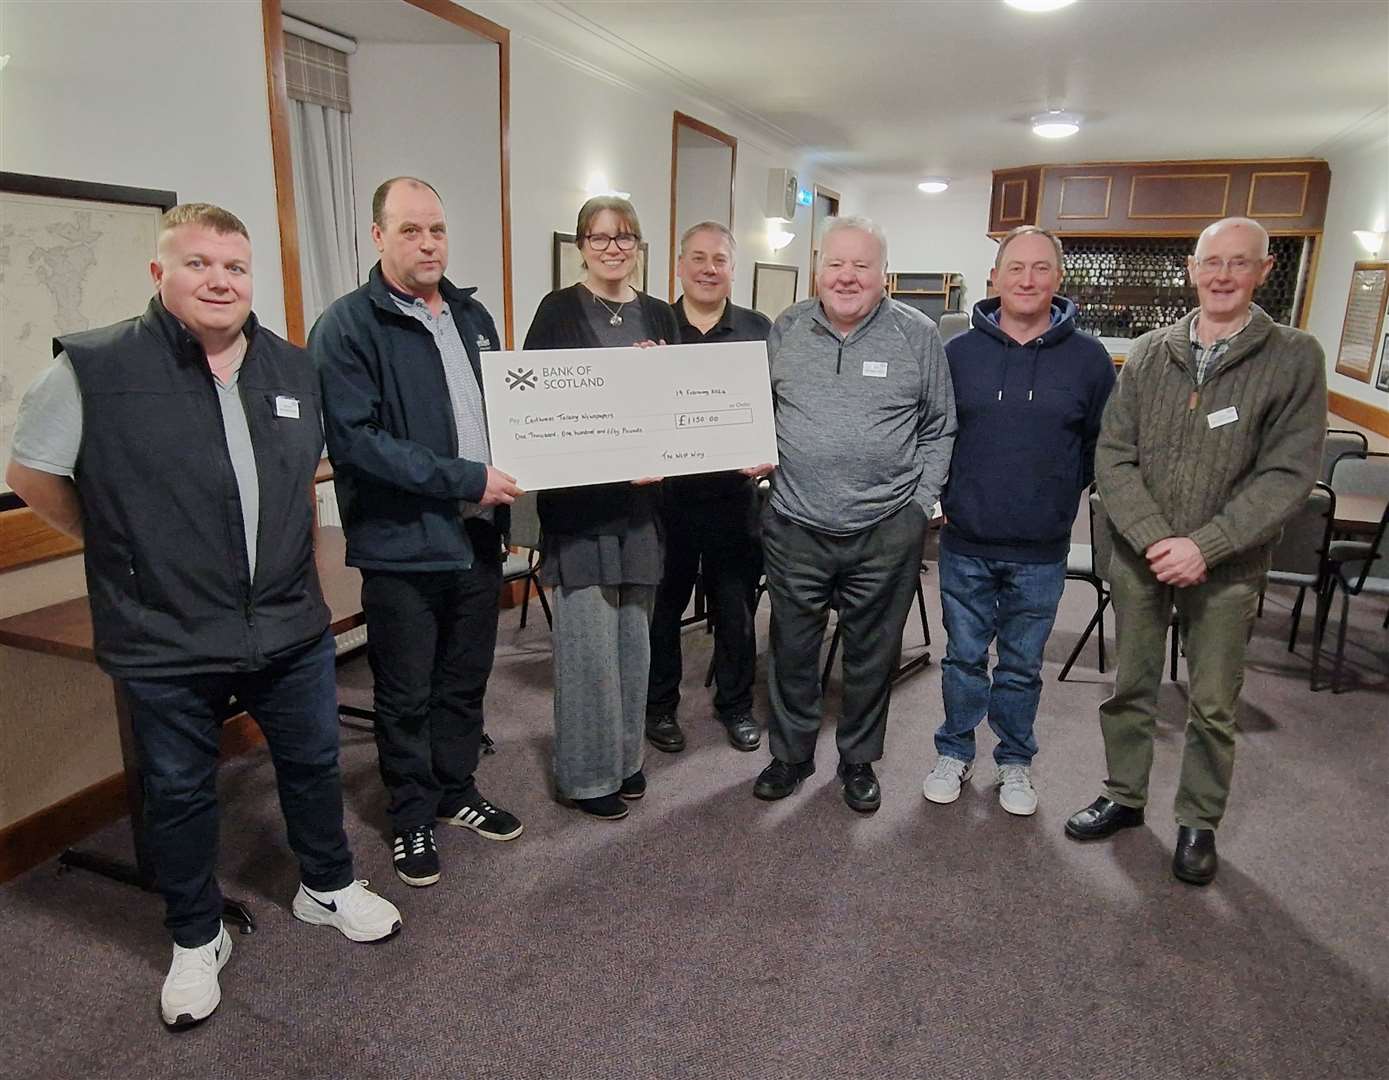 West Wing Crew members presenting the cheque for £1150 to Pauline Gibson (Caithness Talking Newspapers). From left: George Duncan, Kenneth Forbes, Pauline Gibson, Mervyn Hill, Bruce Simpson, Eifion Davies and David Forbes.